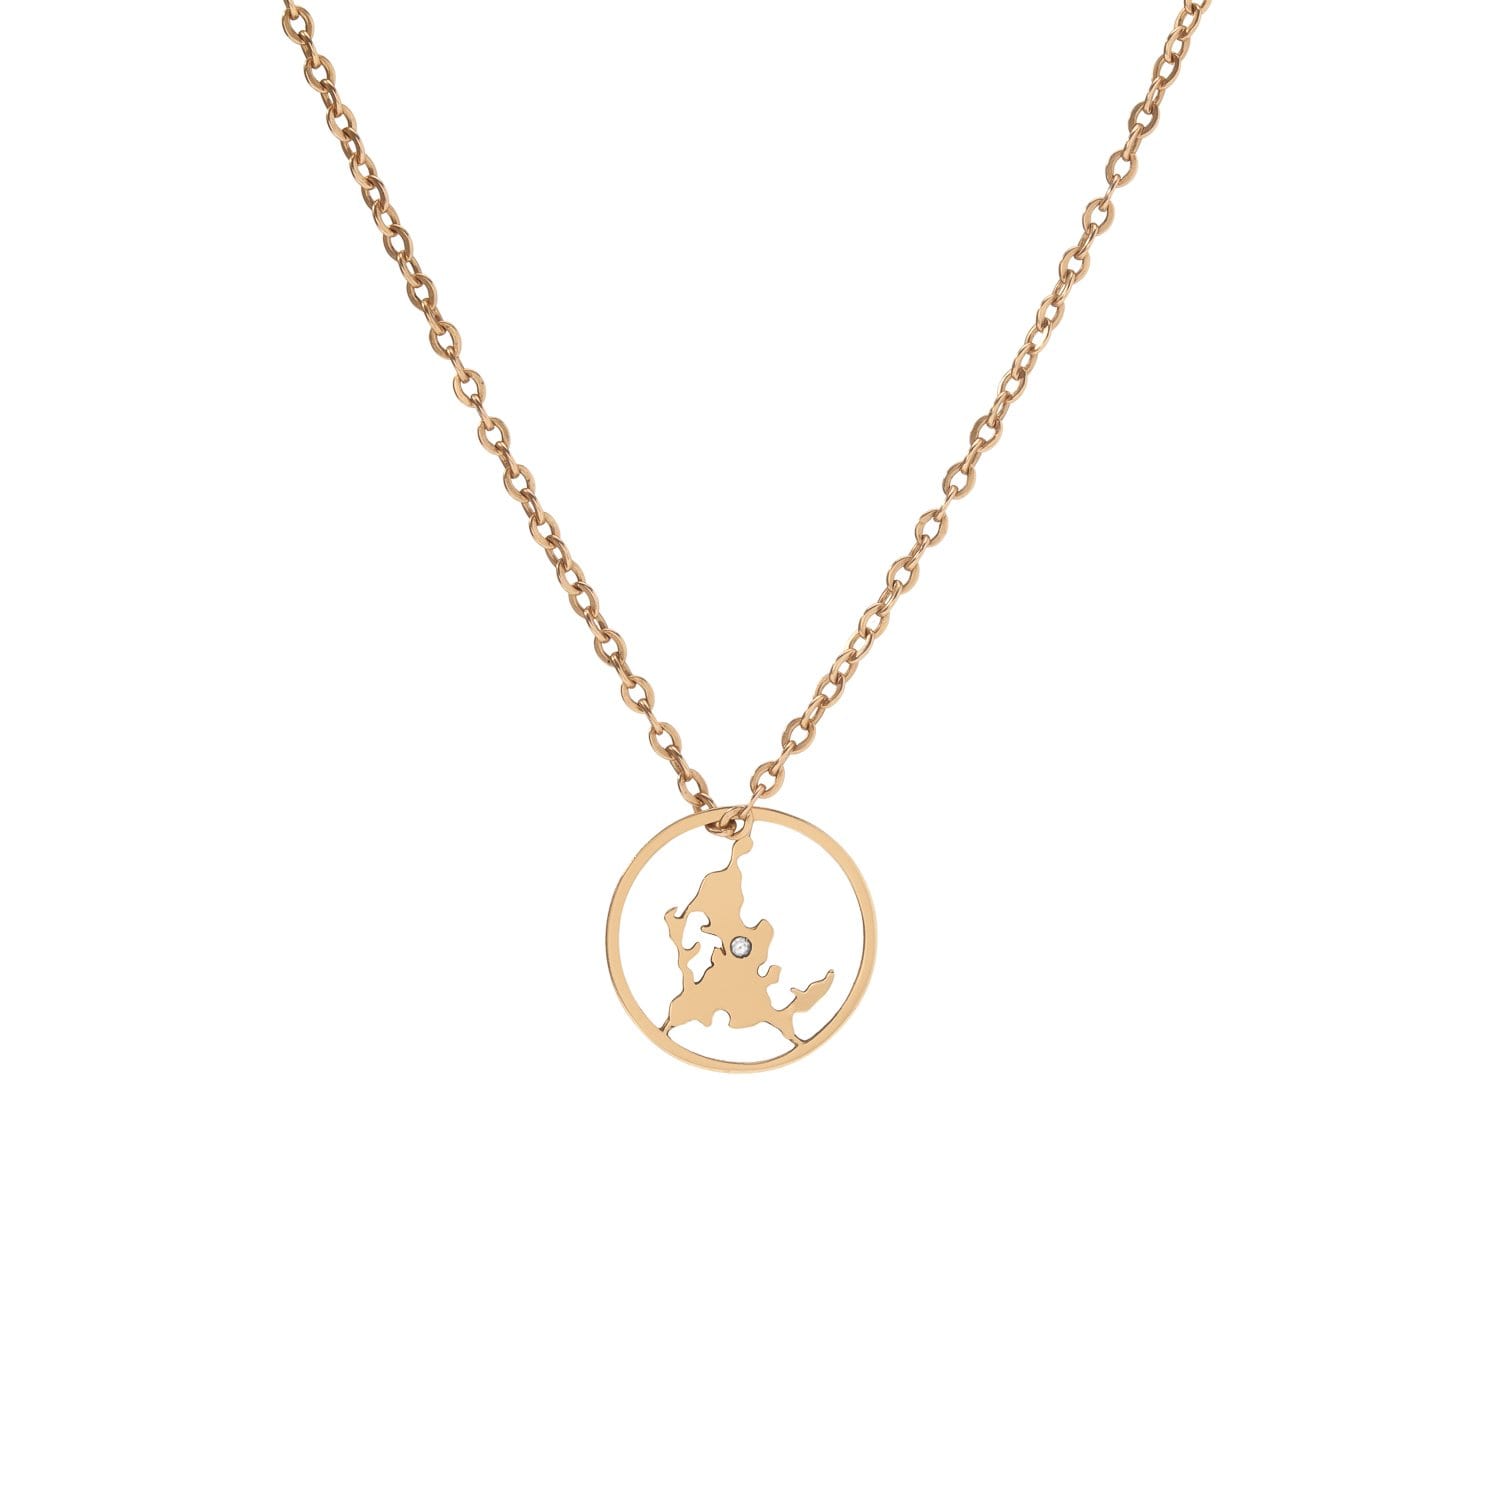 CD Charms | Shelter Island Chained Necklace | Catherine Demarchelier